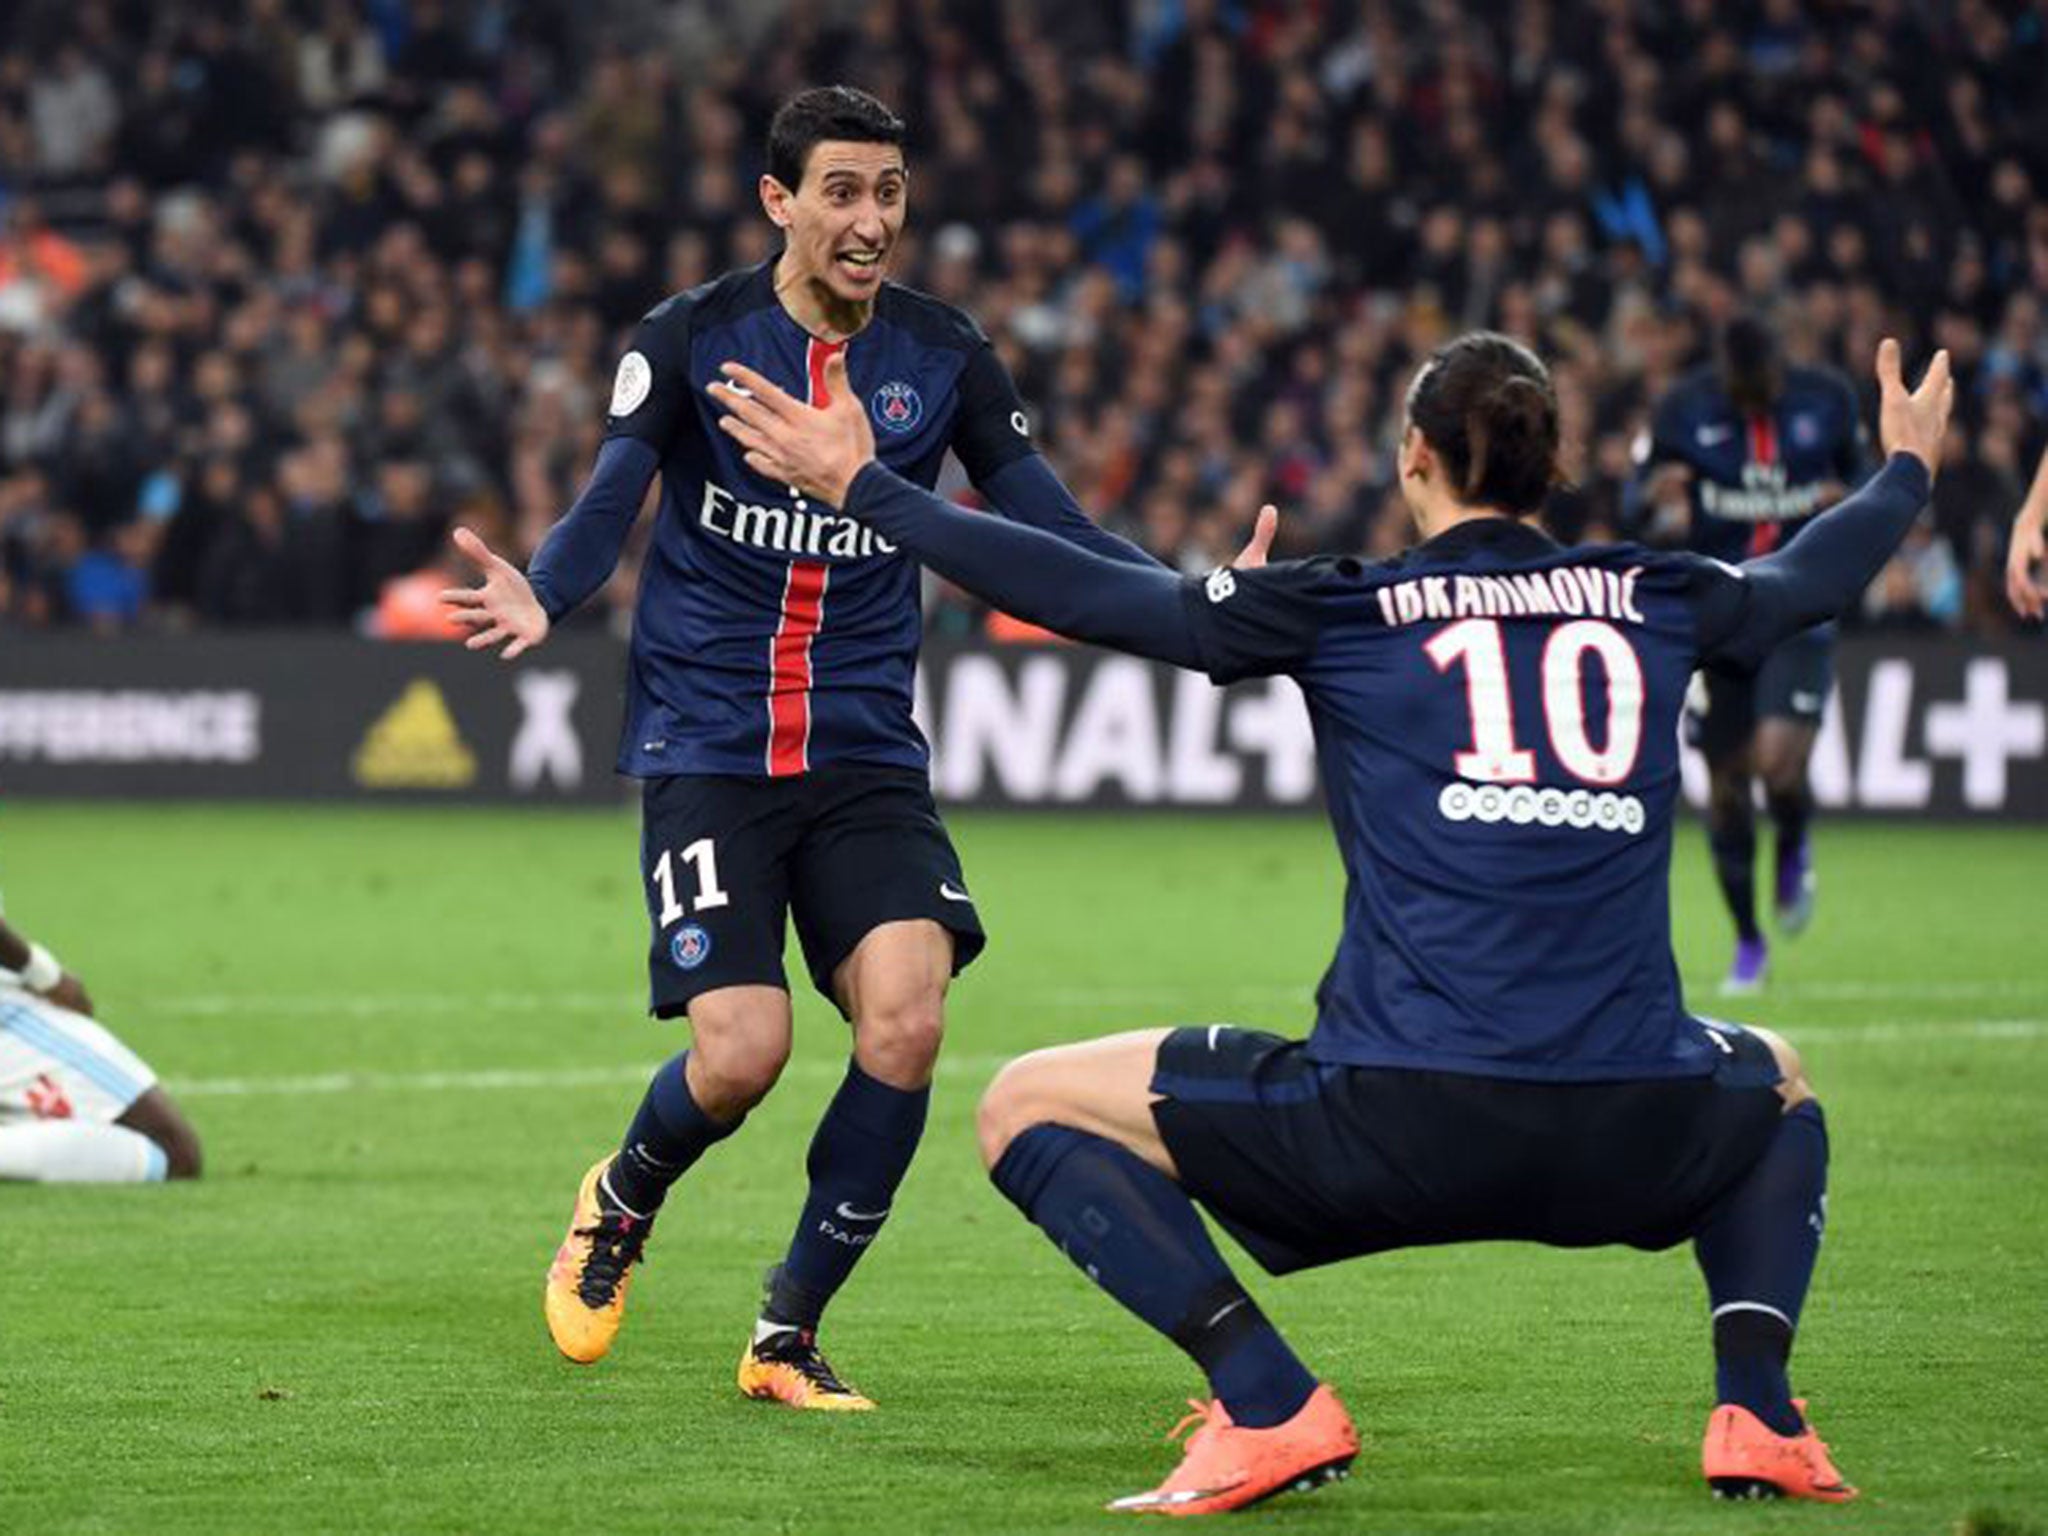 PSG’s Zlatan Ibrahimovic congratulates Angel Di Maria on scoring in a 2-1 win at Marseille, who trail their rivals by 35 points